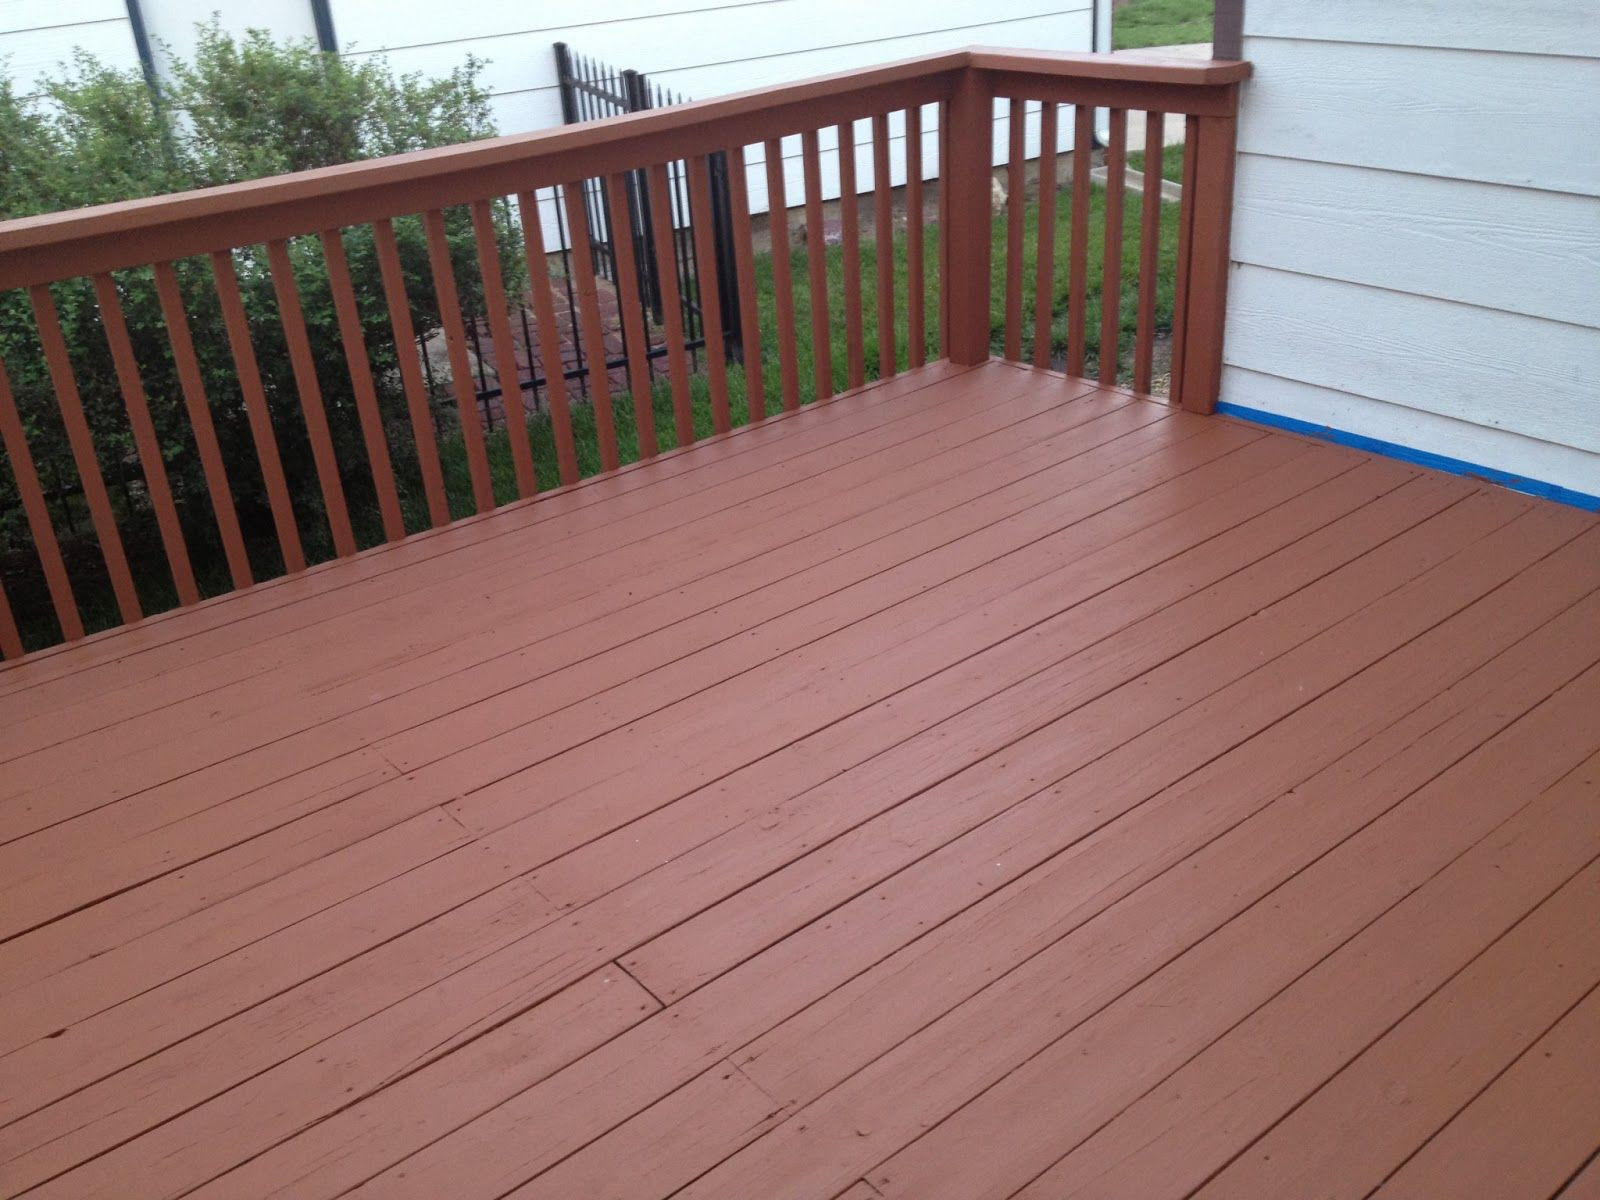 Deck Over Paint Reviews
 Behr Deckover Review With images